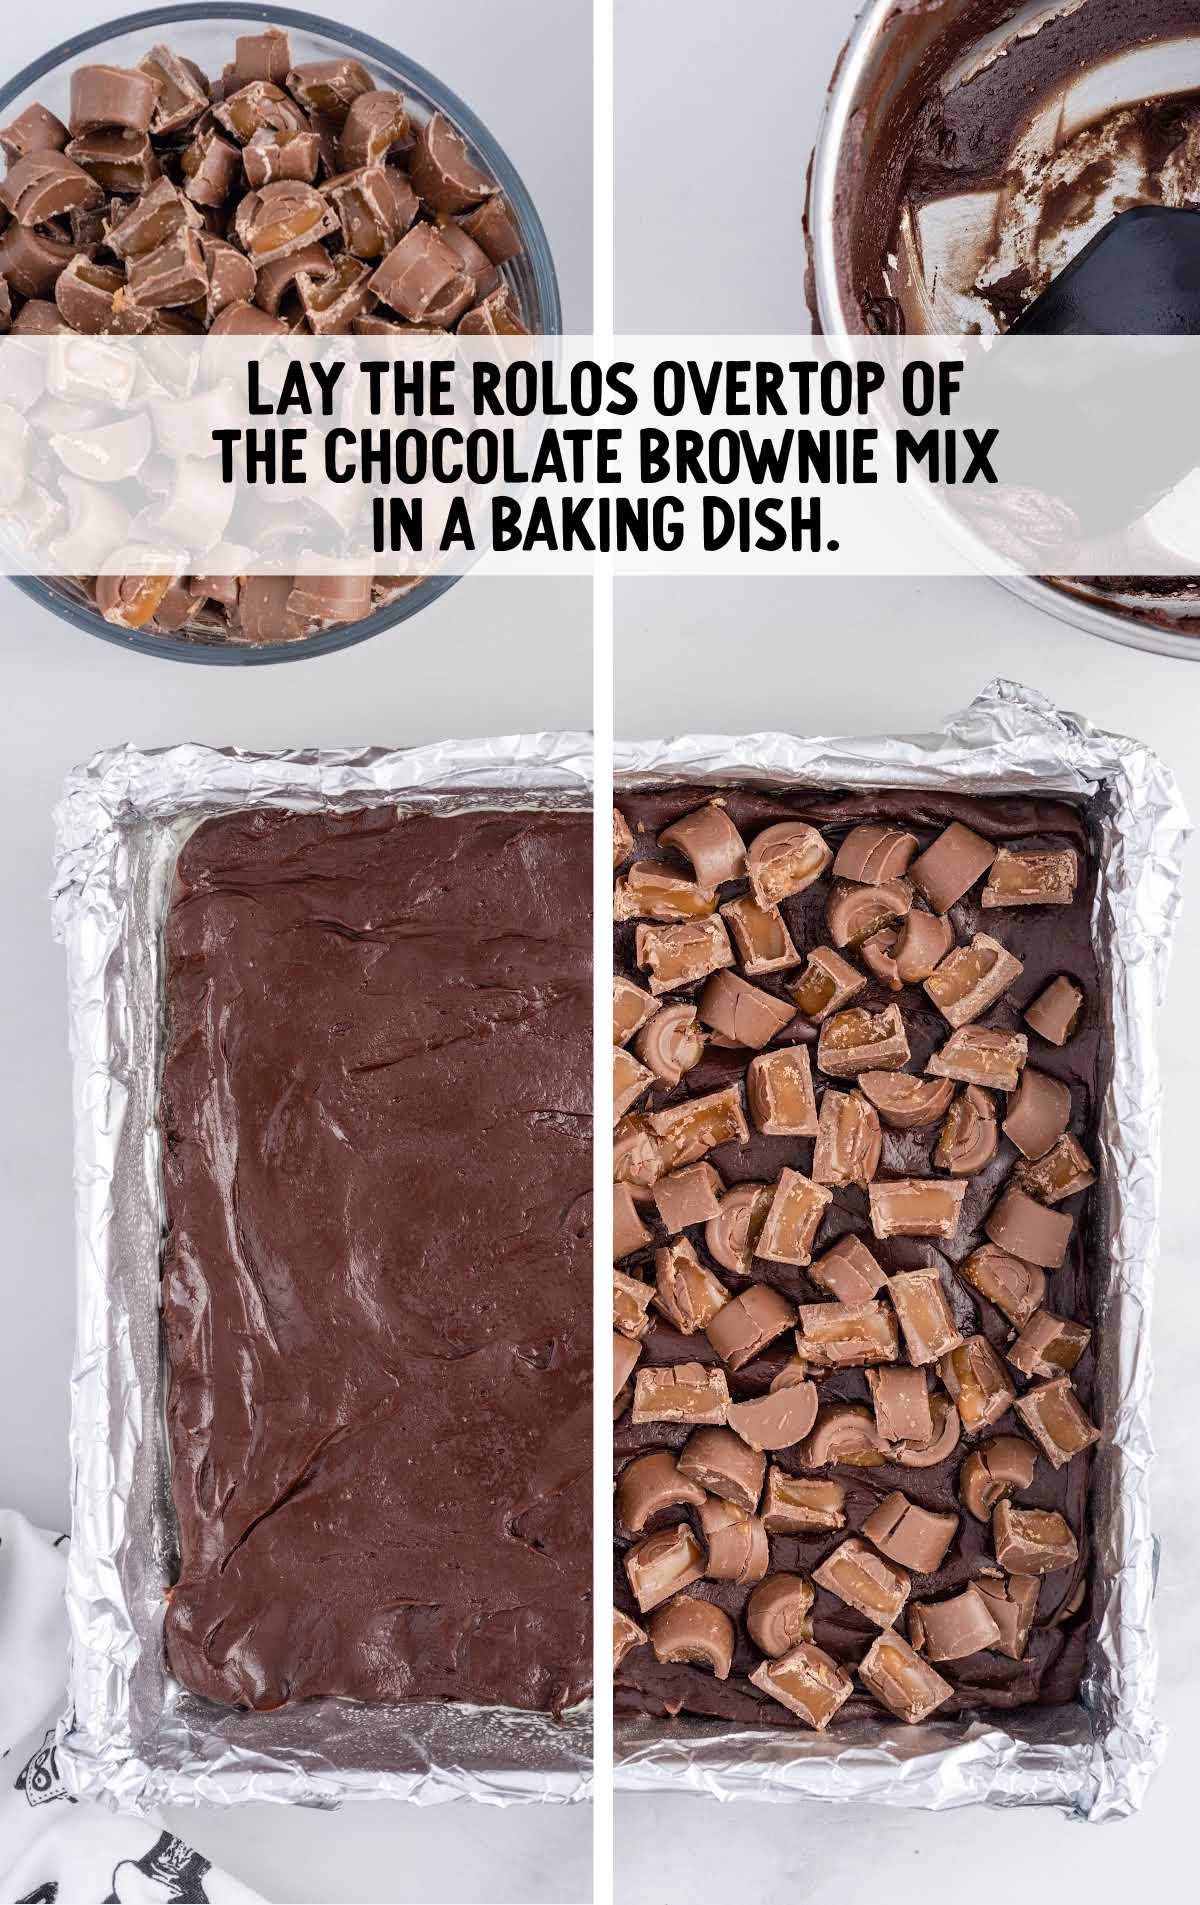 Rolos laid over the top of the chocolate brownie mix in a baking dish